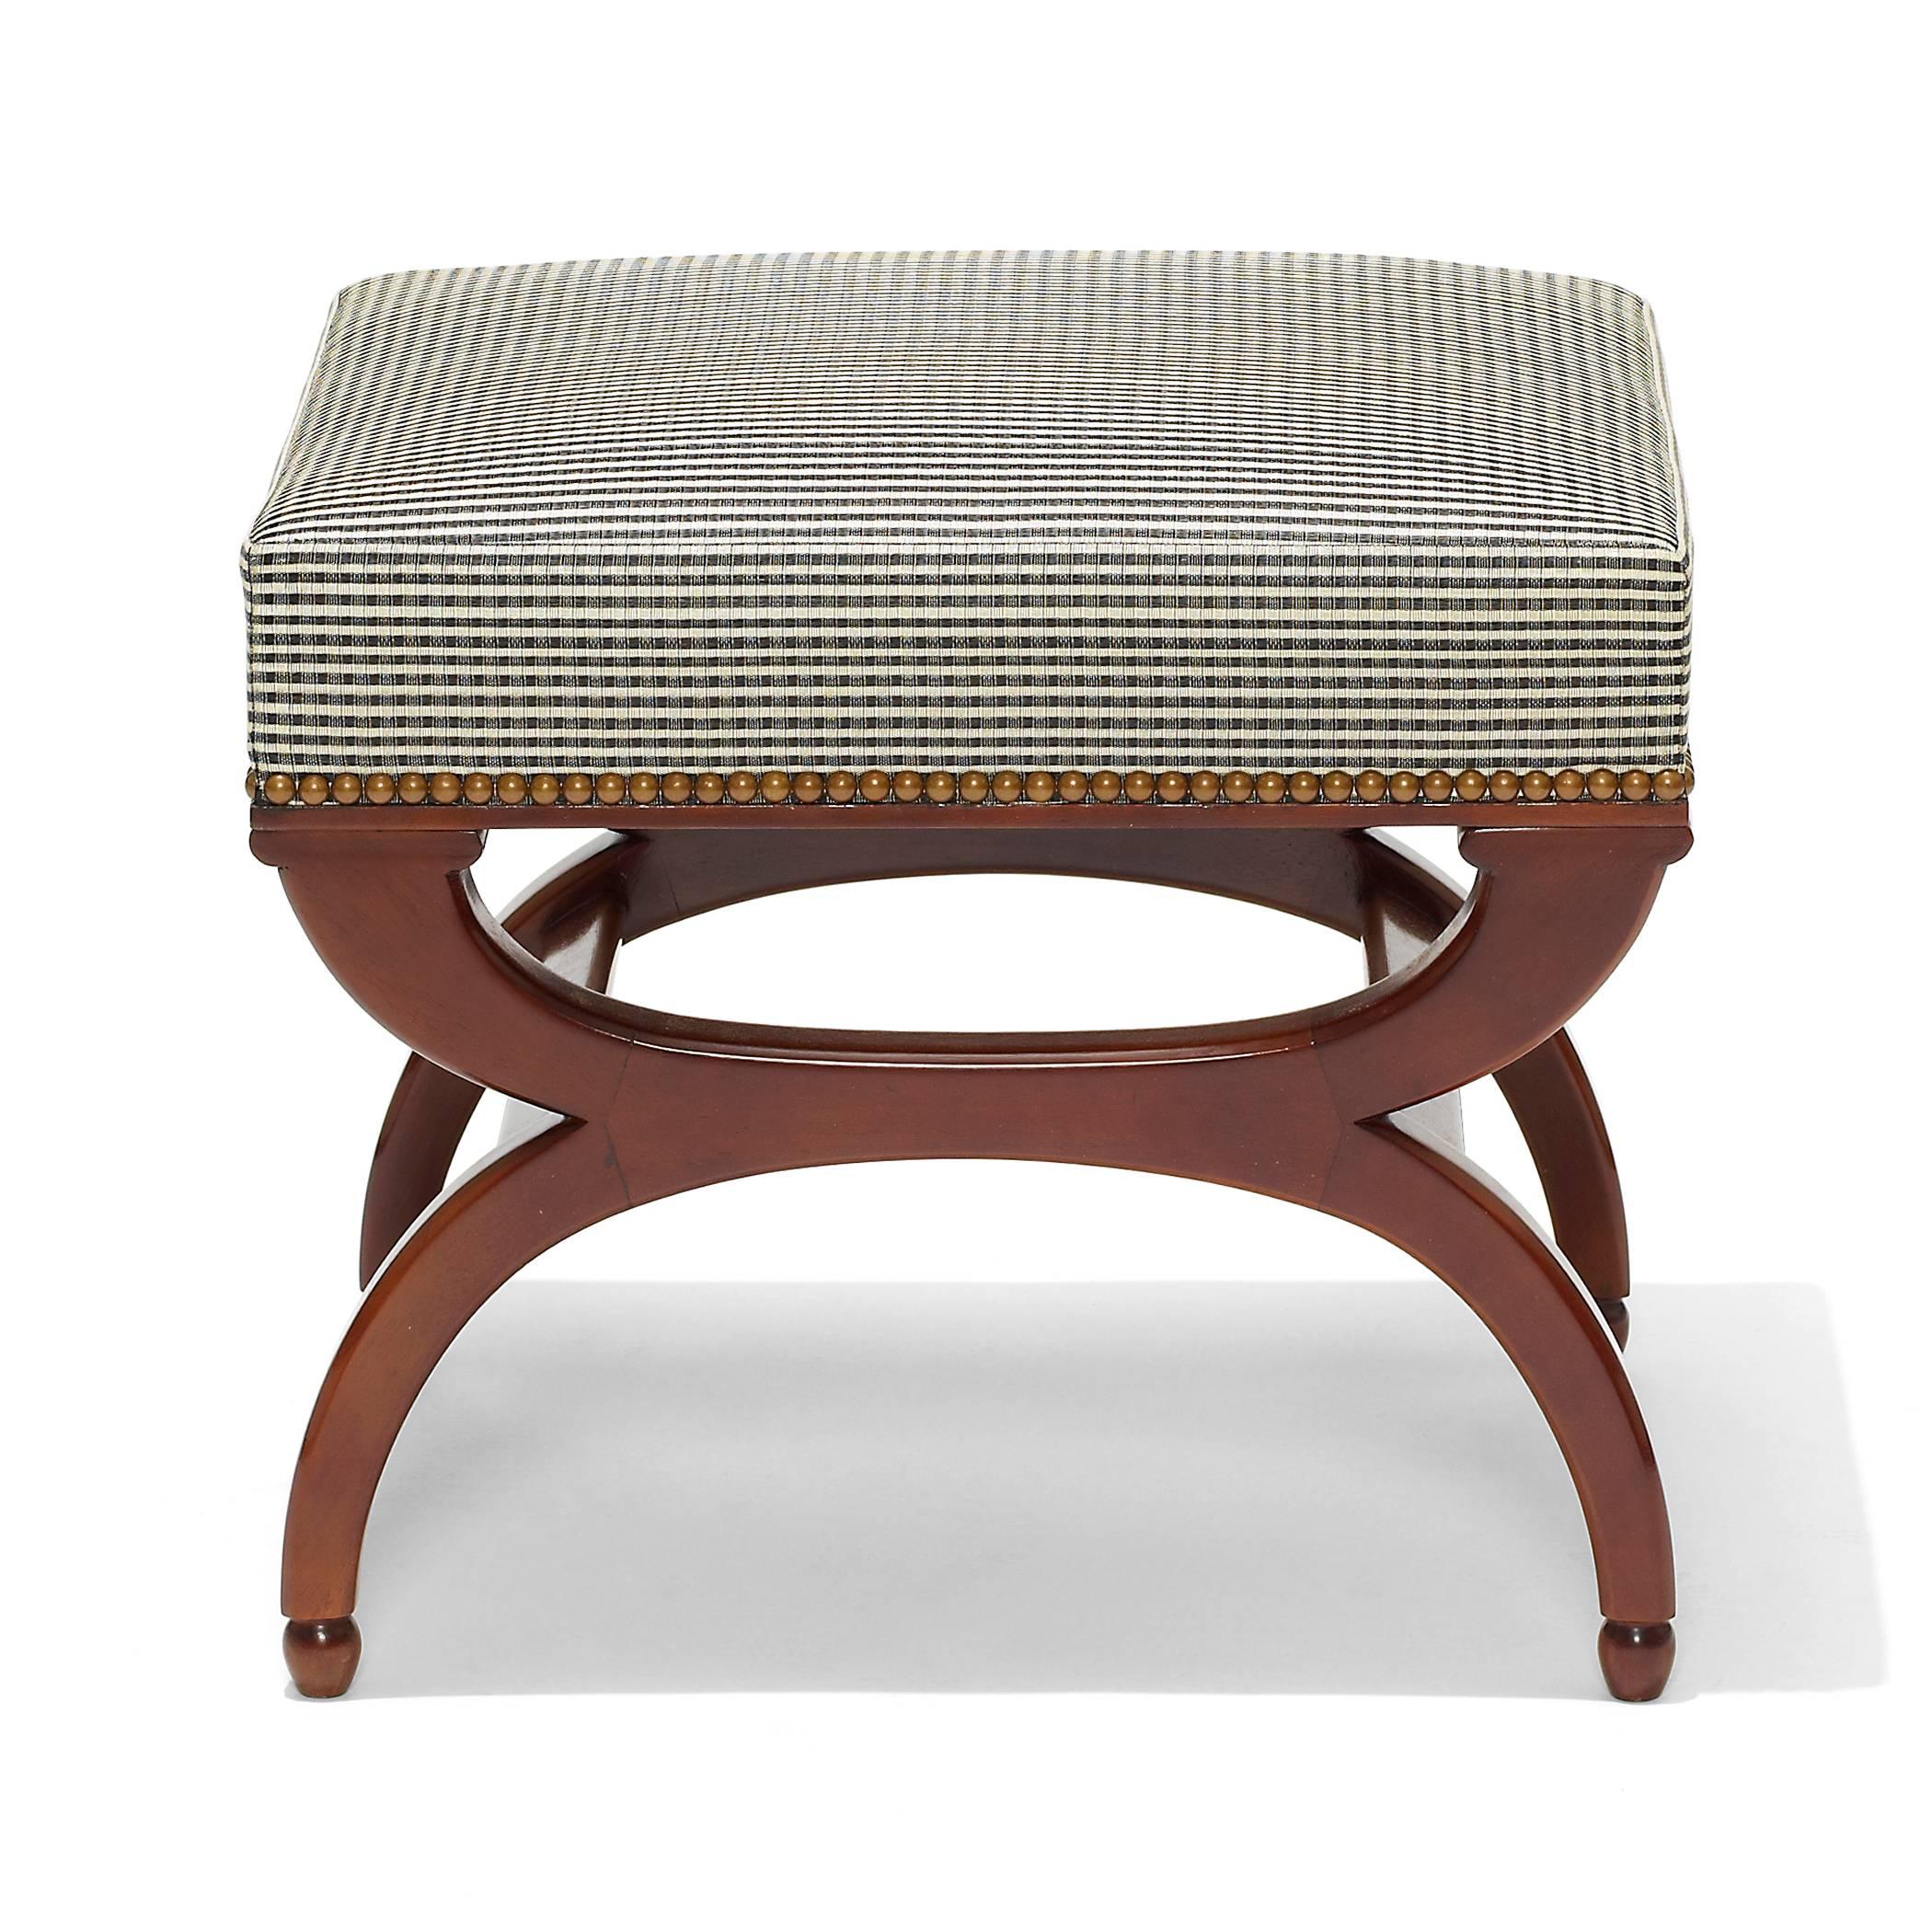 Bench or ottoman by Frits Henningsen (1889-1965), with Curule legs terminating in acorn feet, in solid carved Cuban mahogany, recently reupholstered with ivory and black checkered pattern horsehair fabric, Denmark, 1940s.